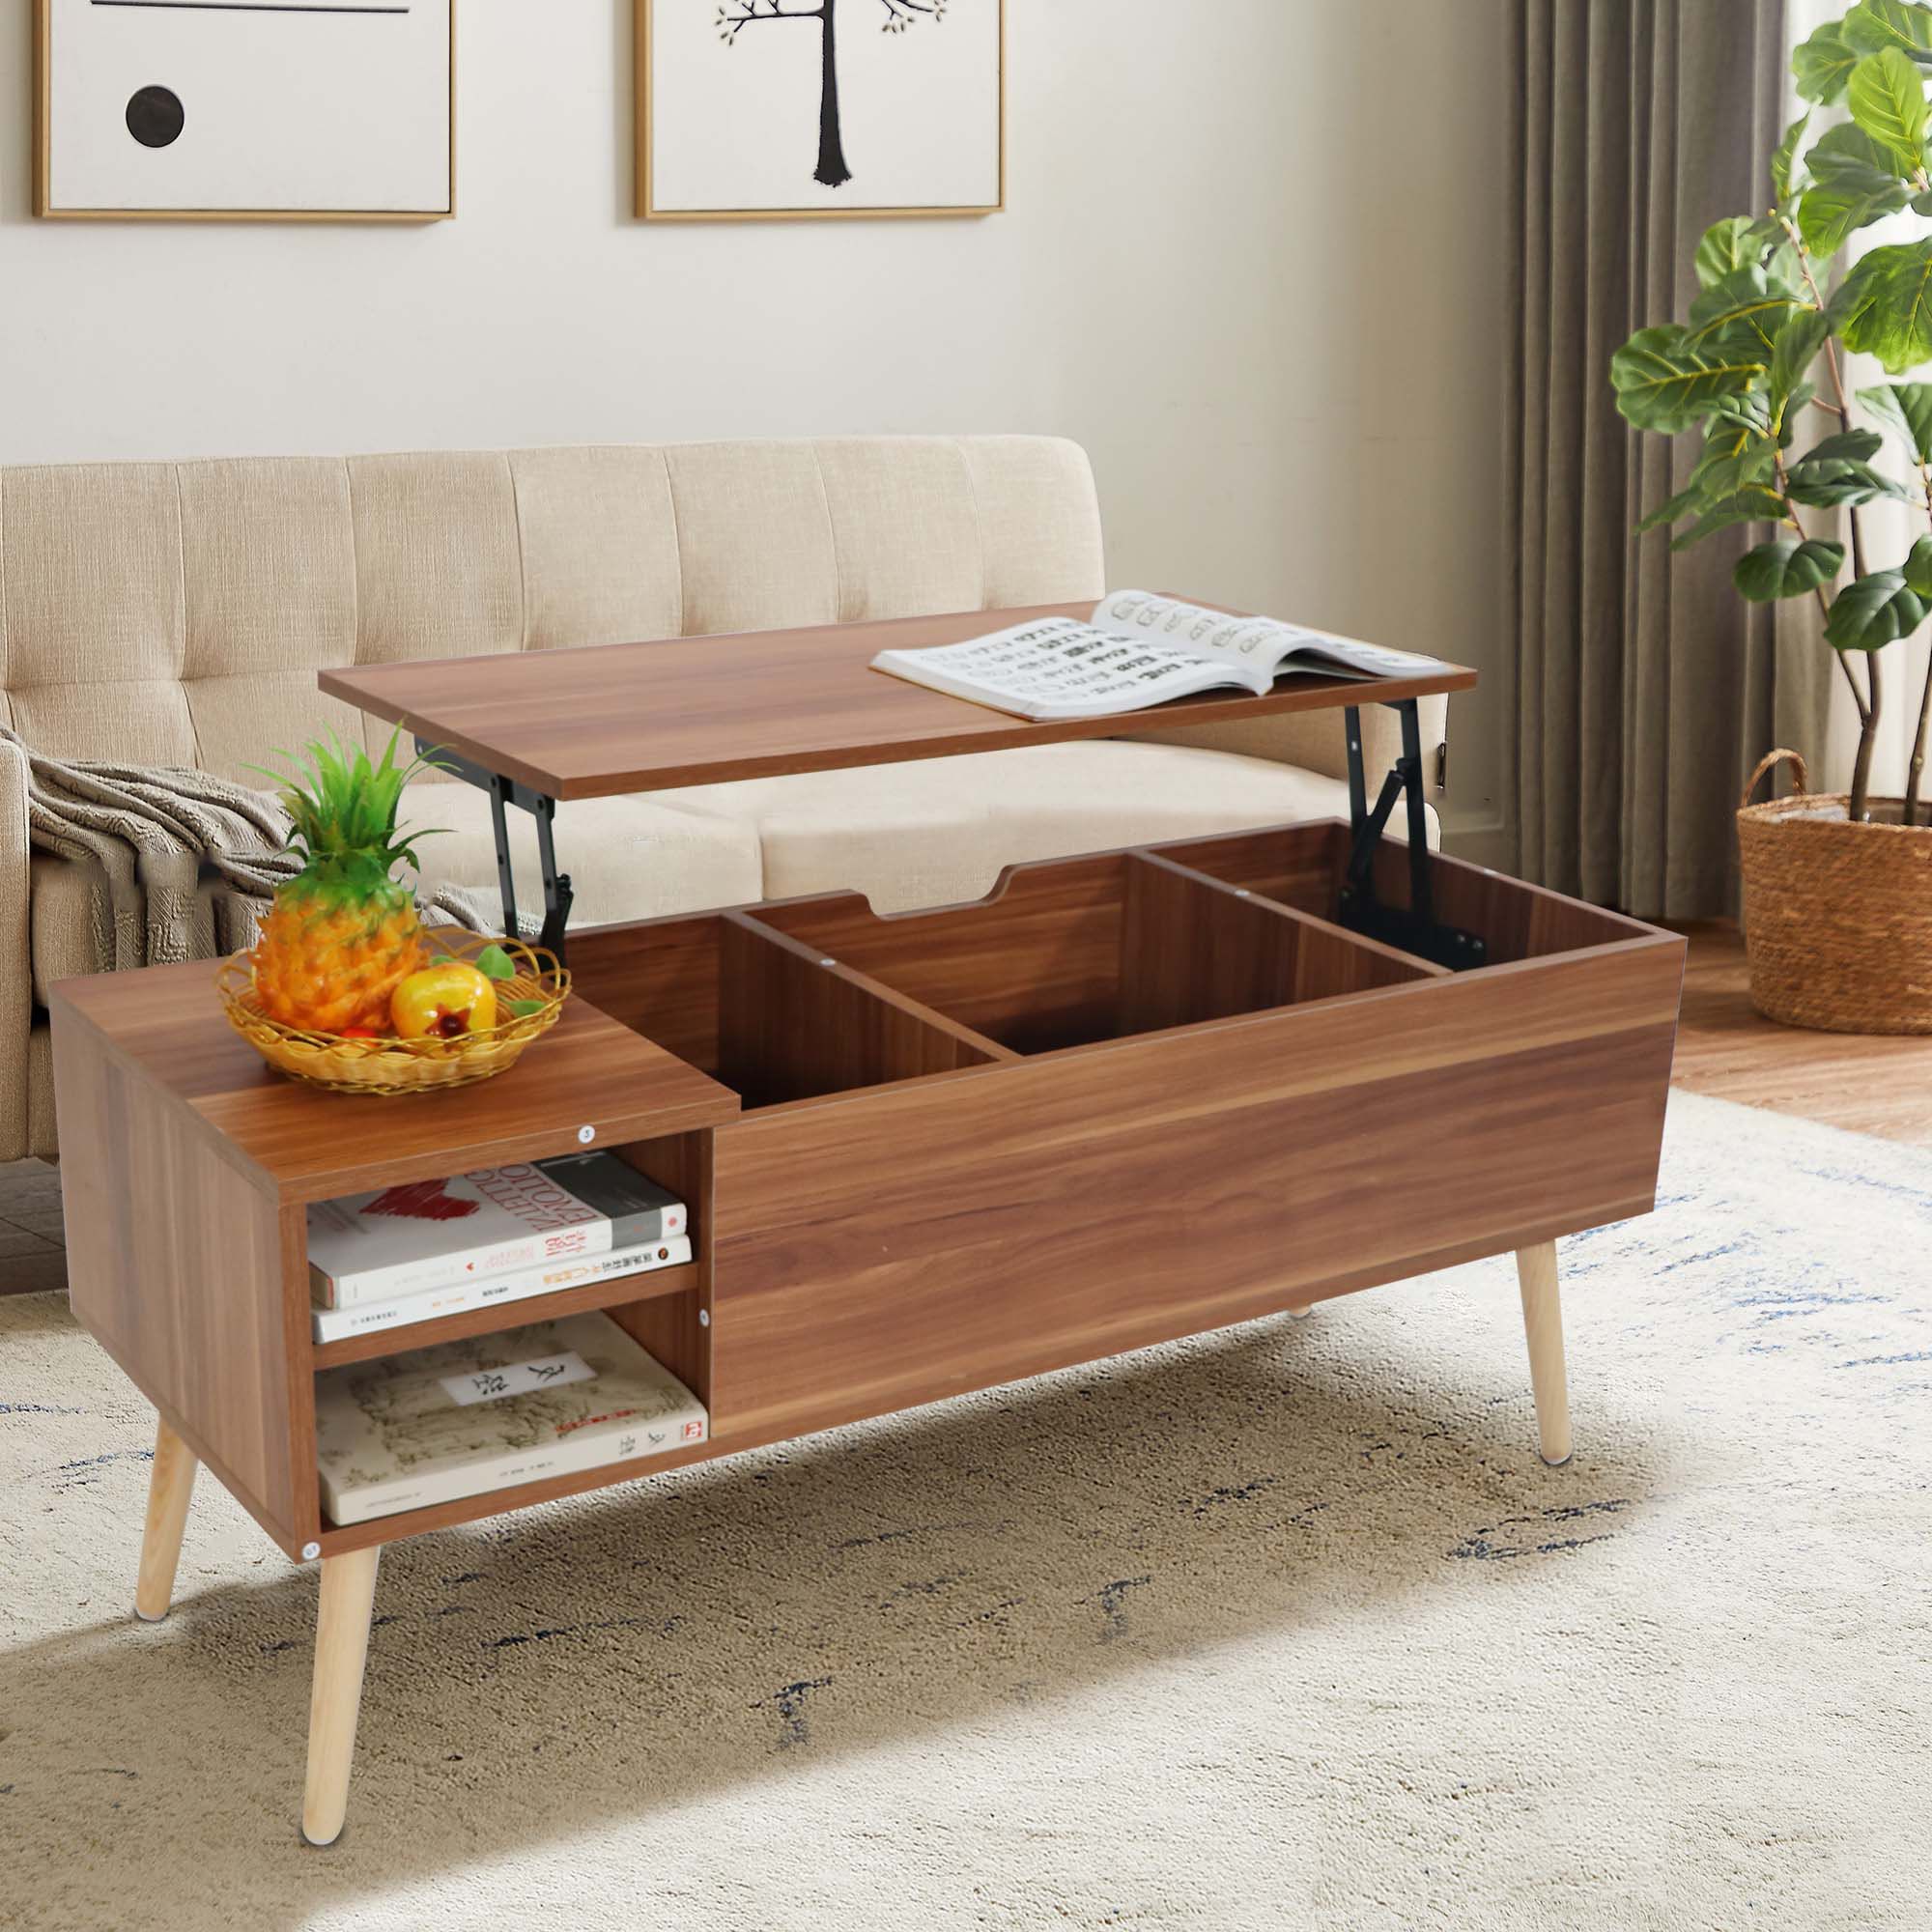 Corrigan Studio® Accent Furniture Home Decor,Open Storage Shelf,Storage  Coffee Table With Hidden Compartment And Adjustable Storage  Shelf,Lifttabletopdiningtable For Living Room | Wayfair Throughout Coffee Tables With Hidden Compartments (View 15 of 15)